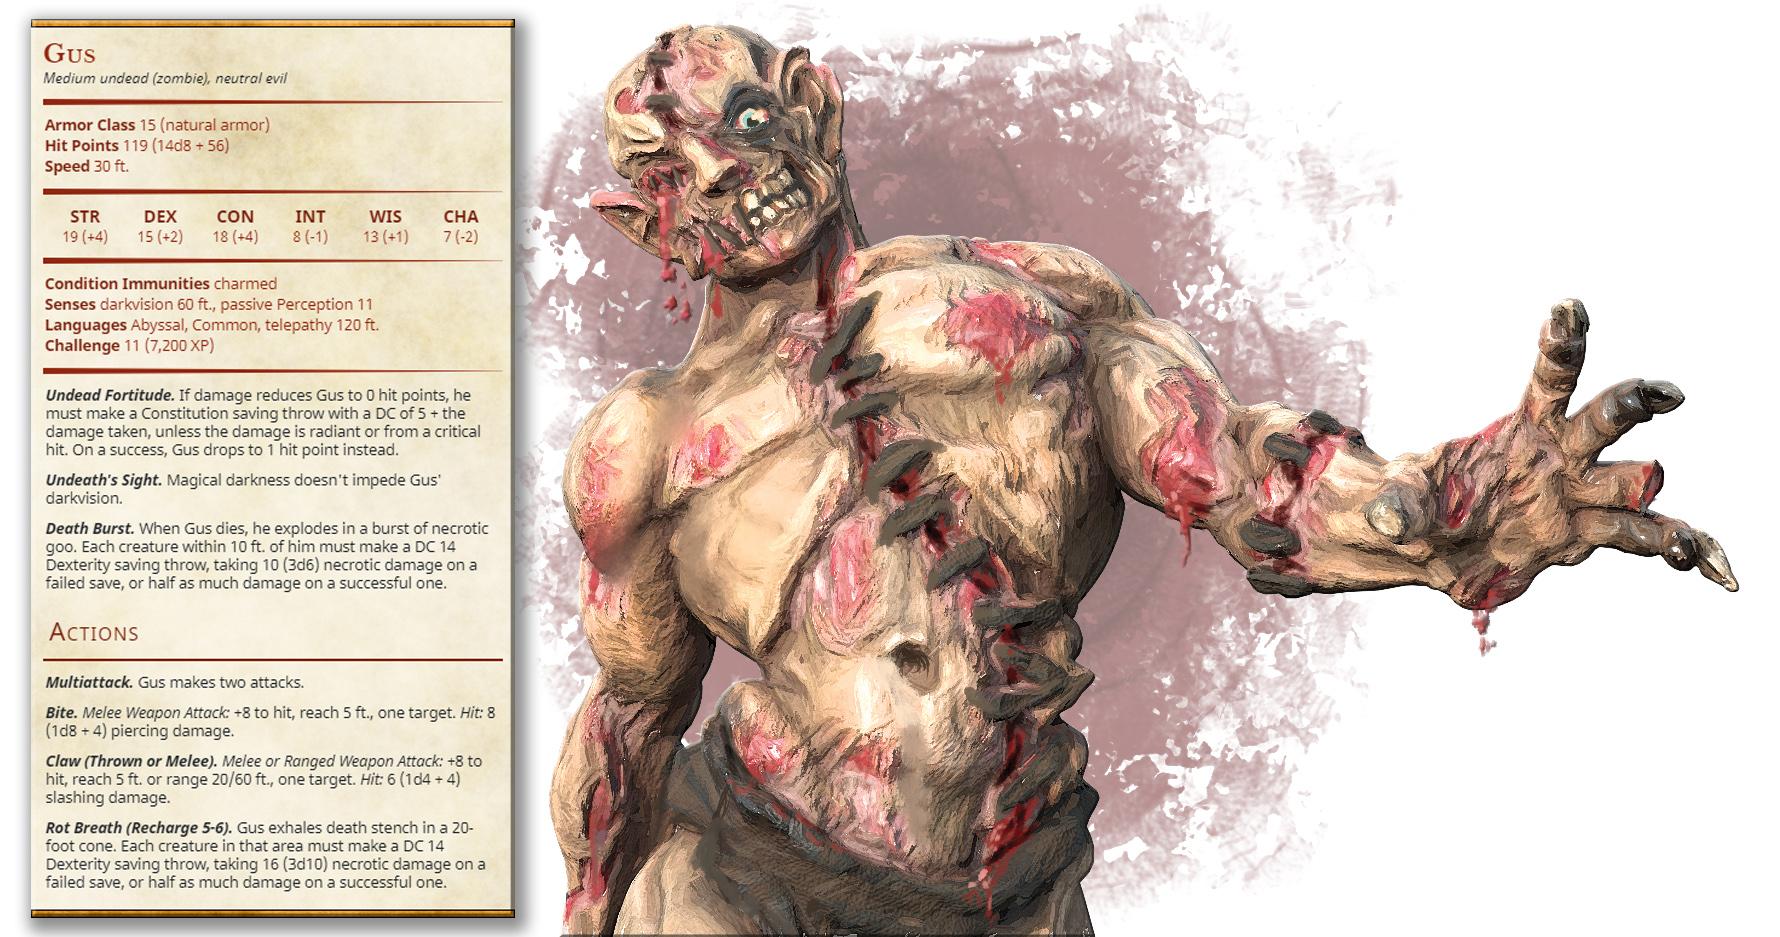 Flesh Golem - Constructs - PRESUPPORTED - Illustrated and Stats - 32mm scale			 3d model